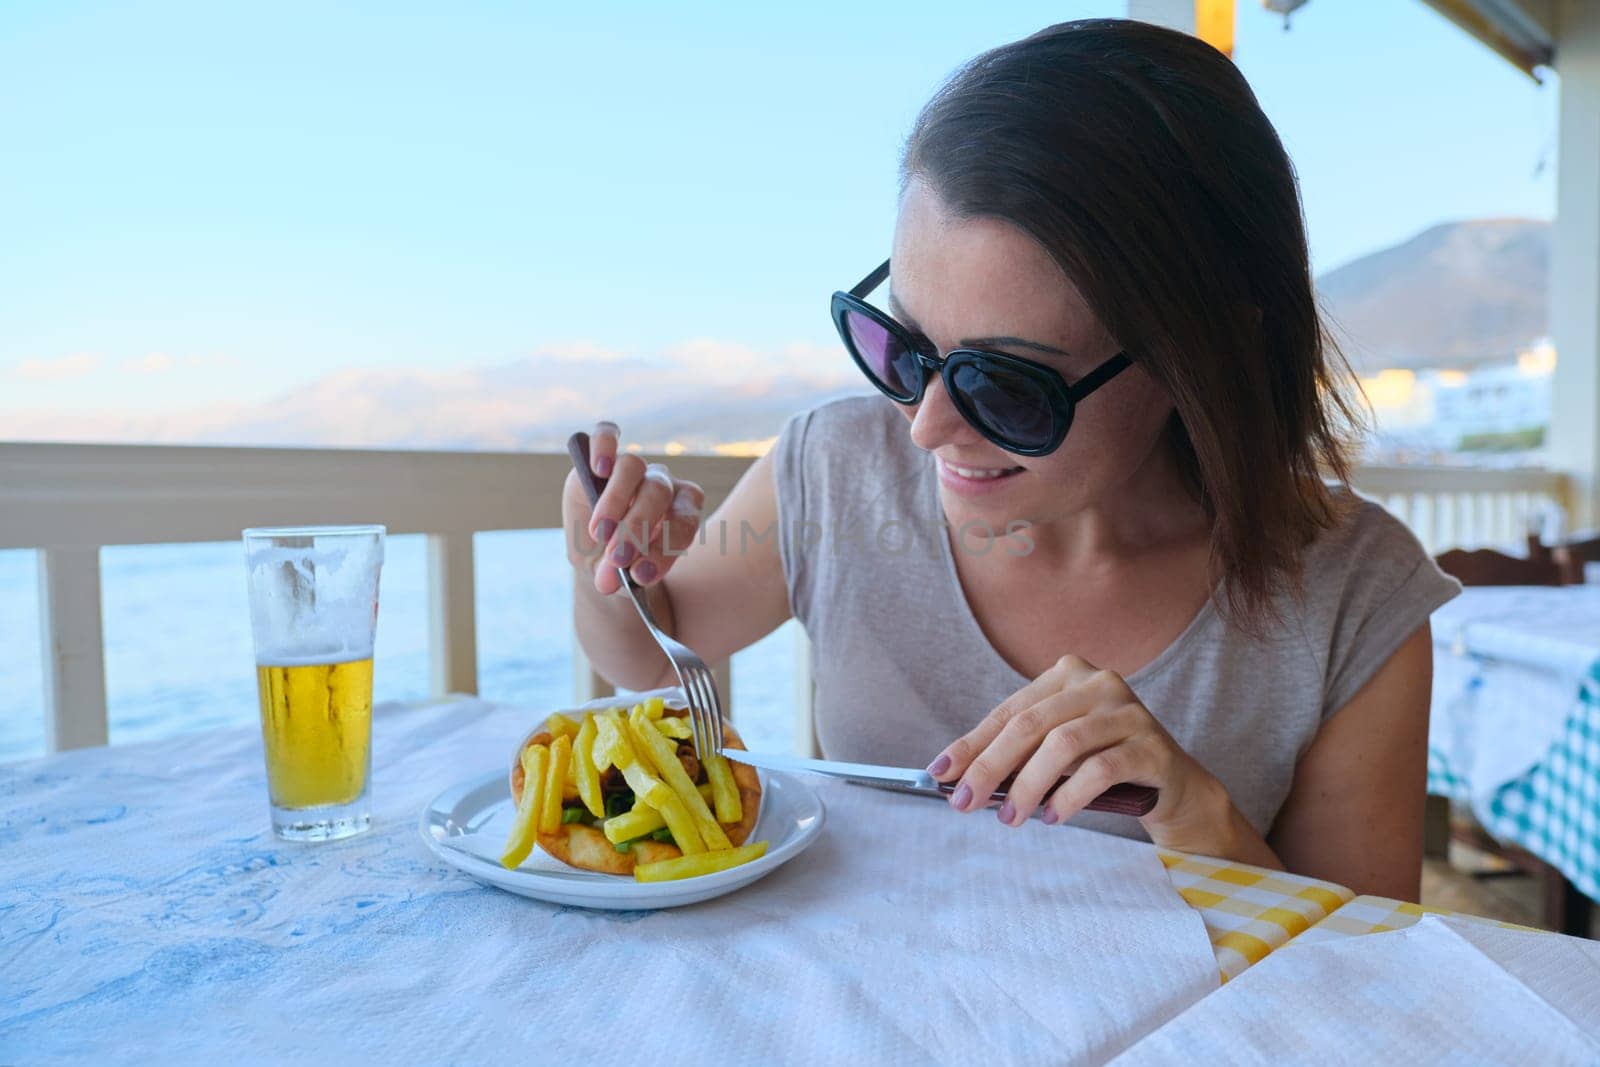 Mature beautiful woman having dinner at seaside resort cafe. Female eating and drinking light beer, enjoying meal with drink and picturesque sea sunset